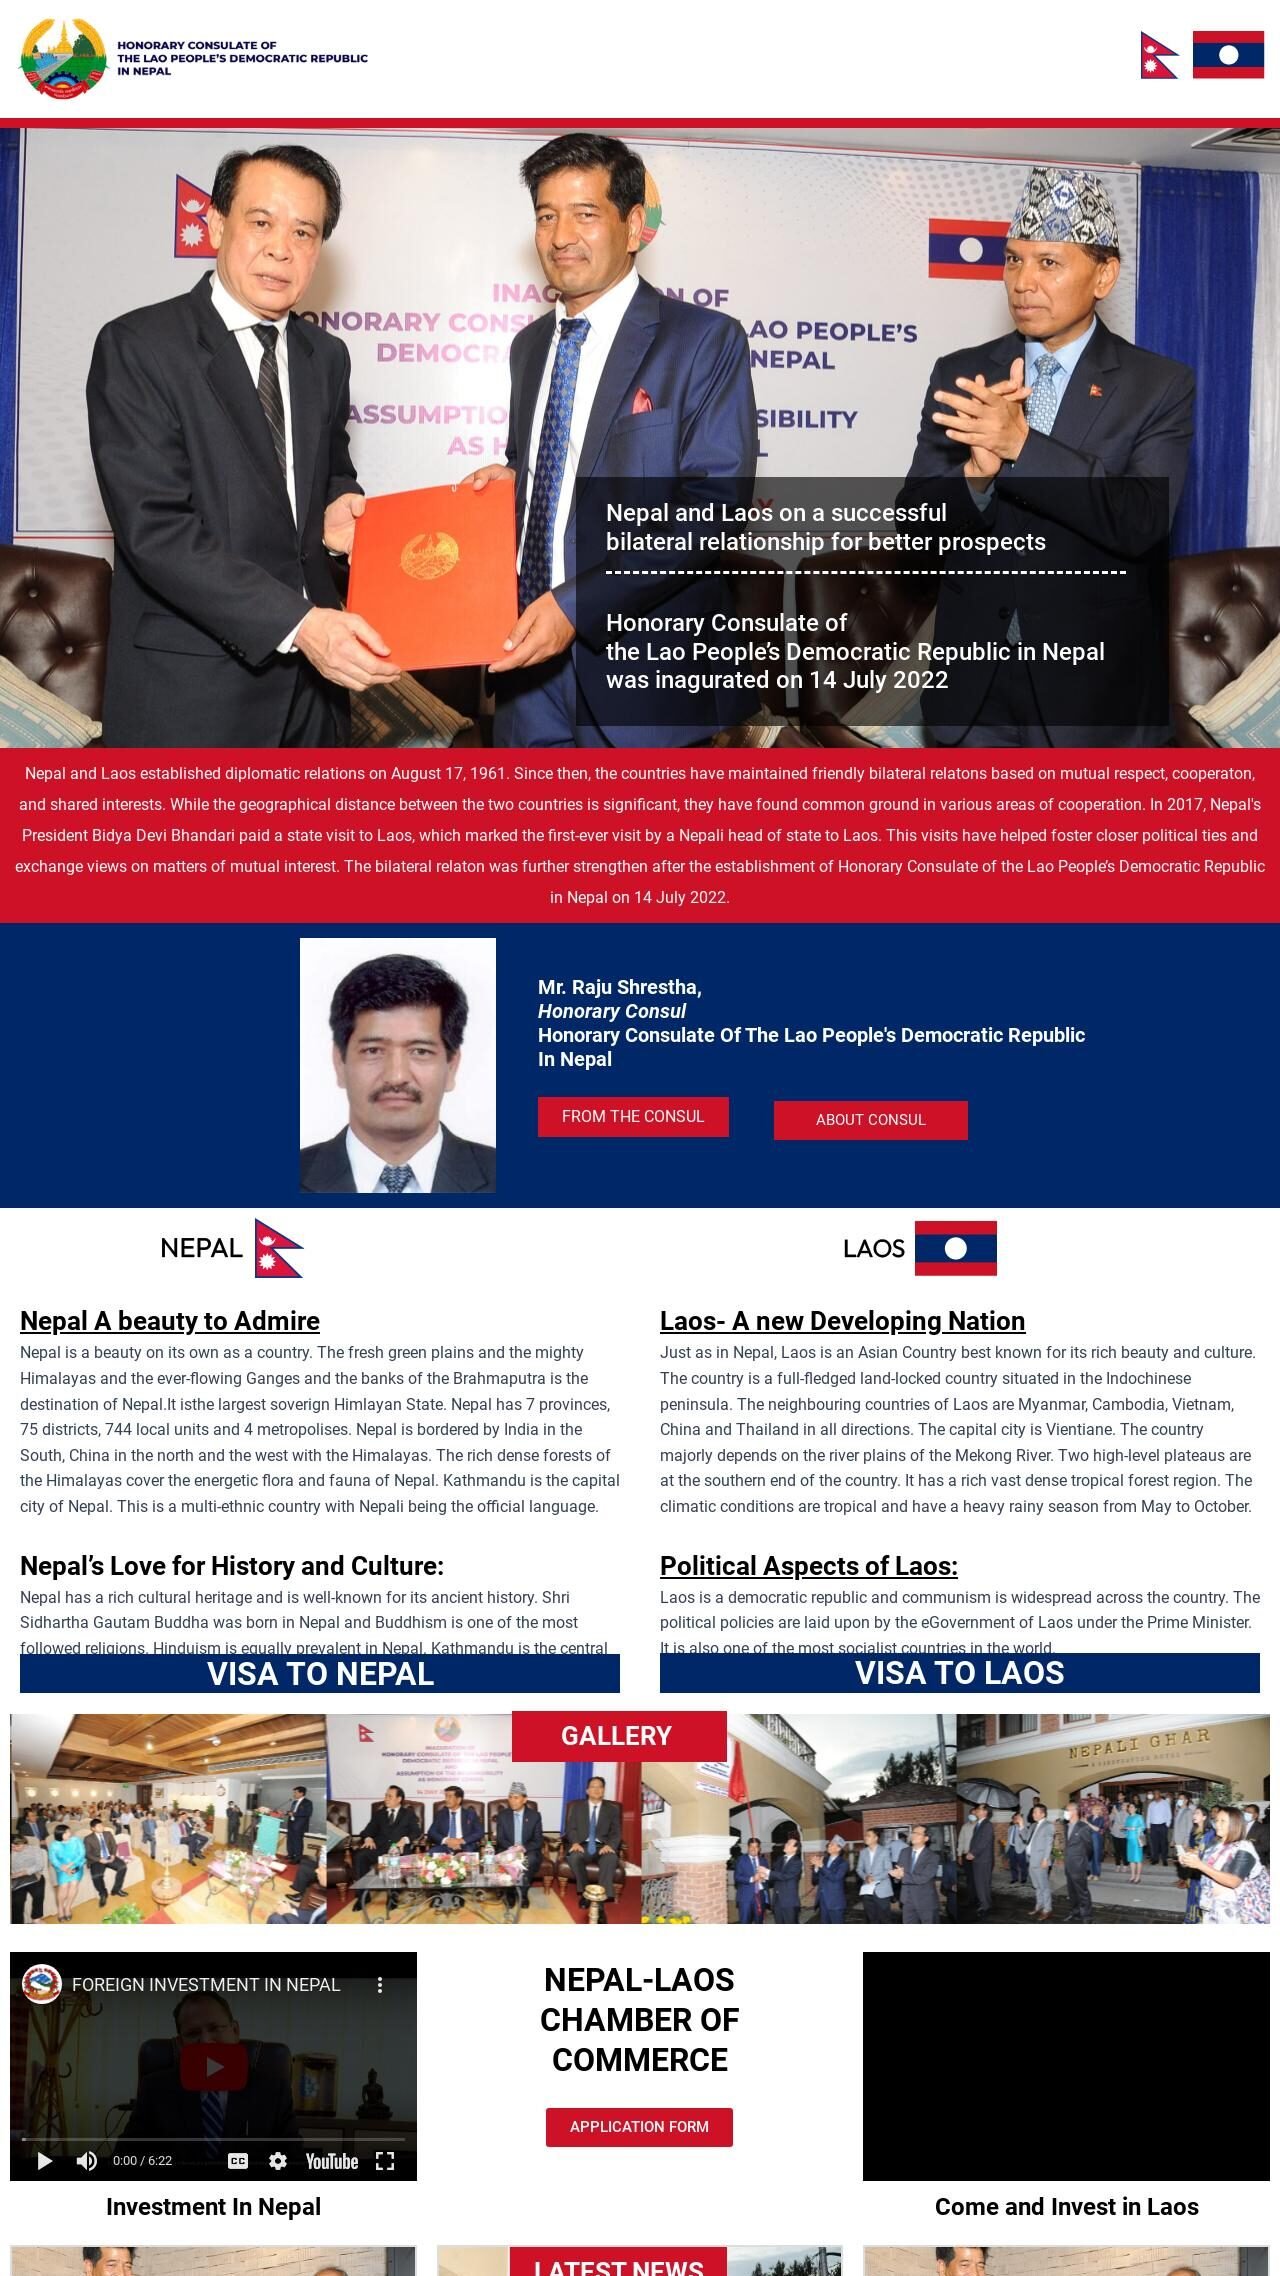 Website of Lao Consulate Office in Nepal by Pixeative Design Studio